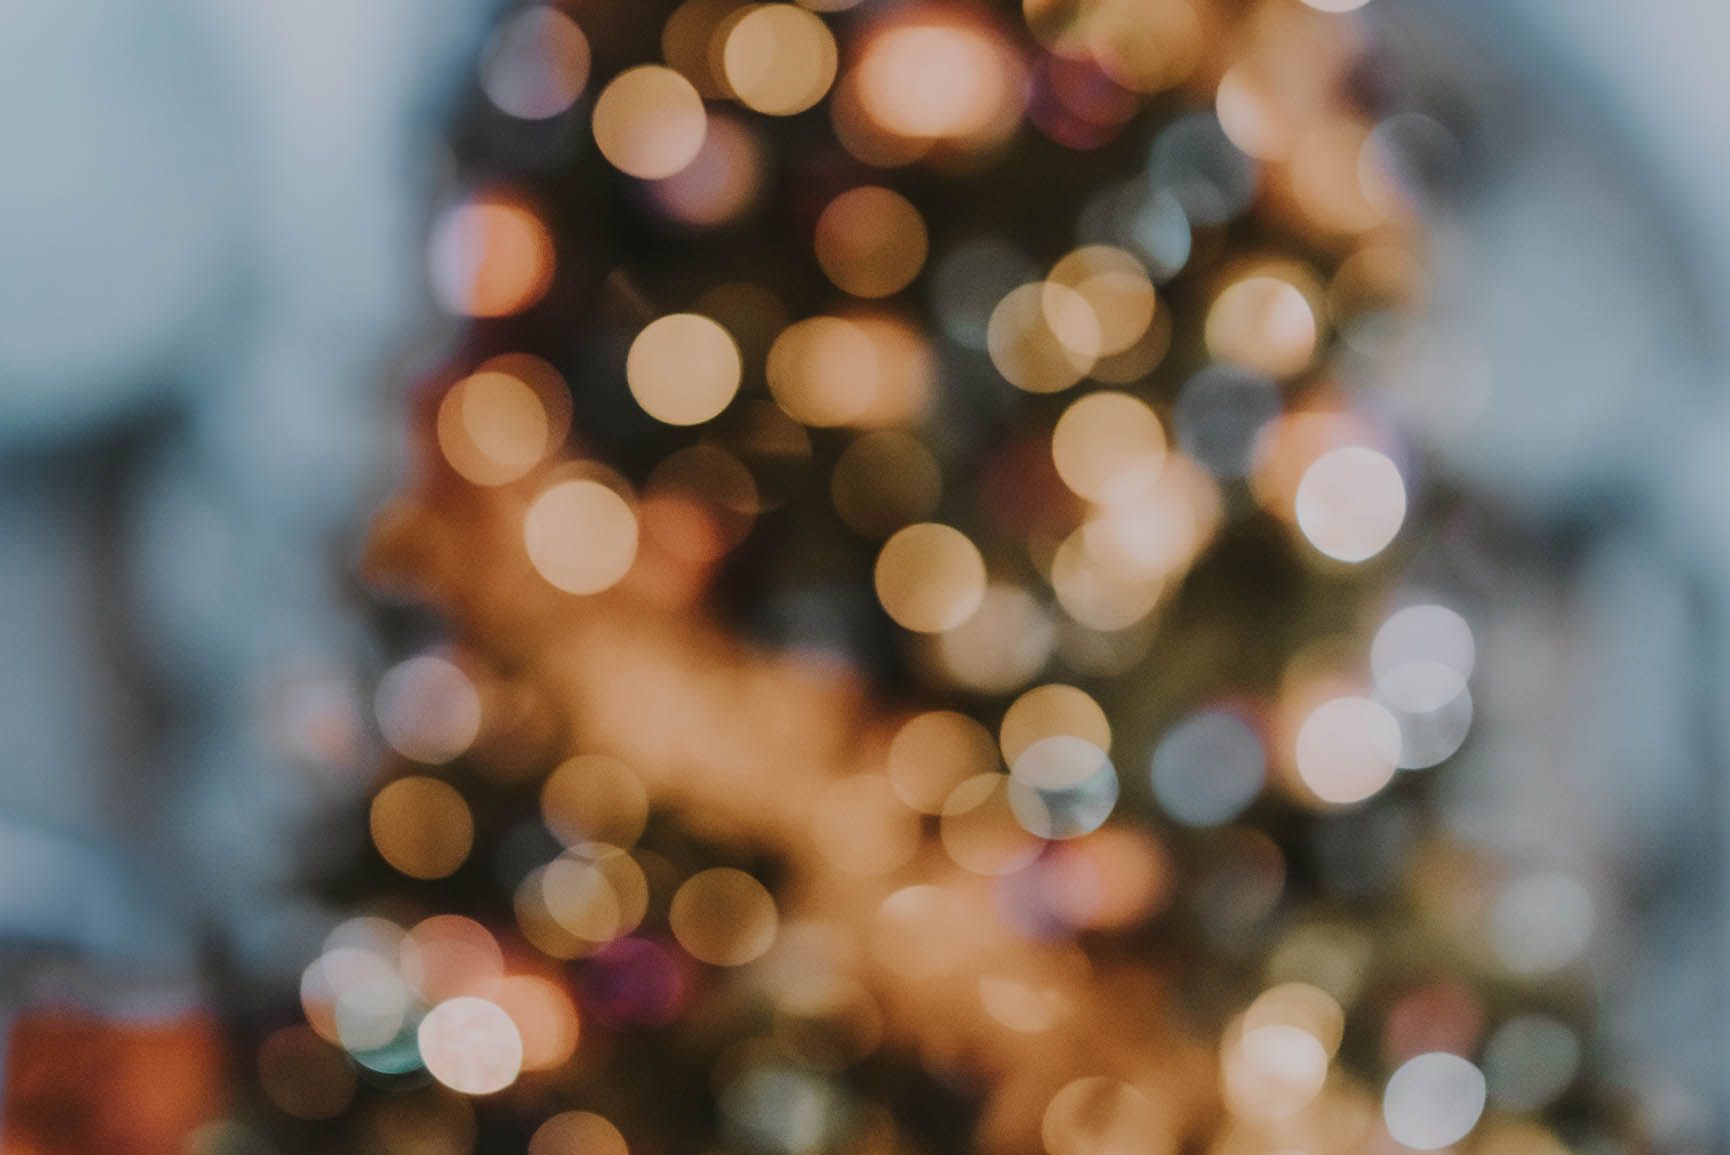 A blurred out Christmas tree with lights on it. - December